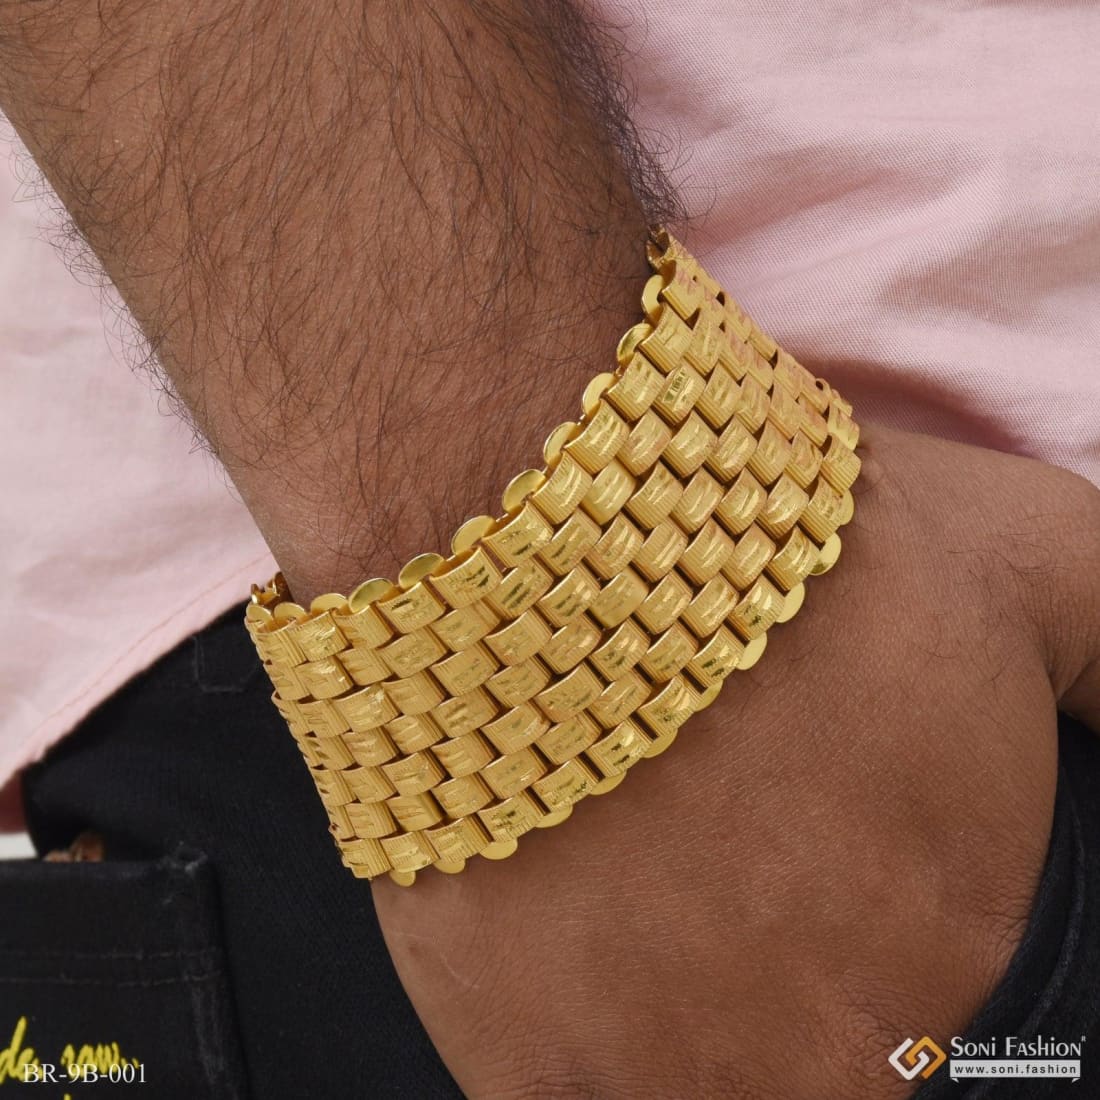 Artisanal Design with Diamond Hand-Crafted Gold Plated Bracelet for Men -  Style C646 – Soni Fashion®